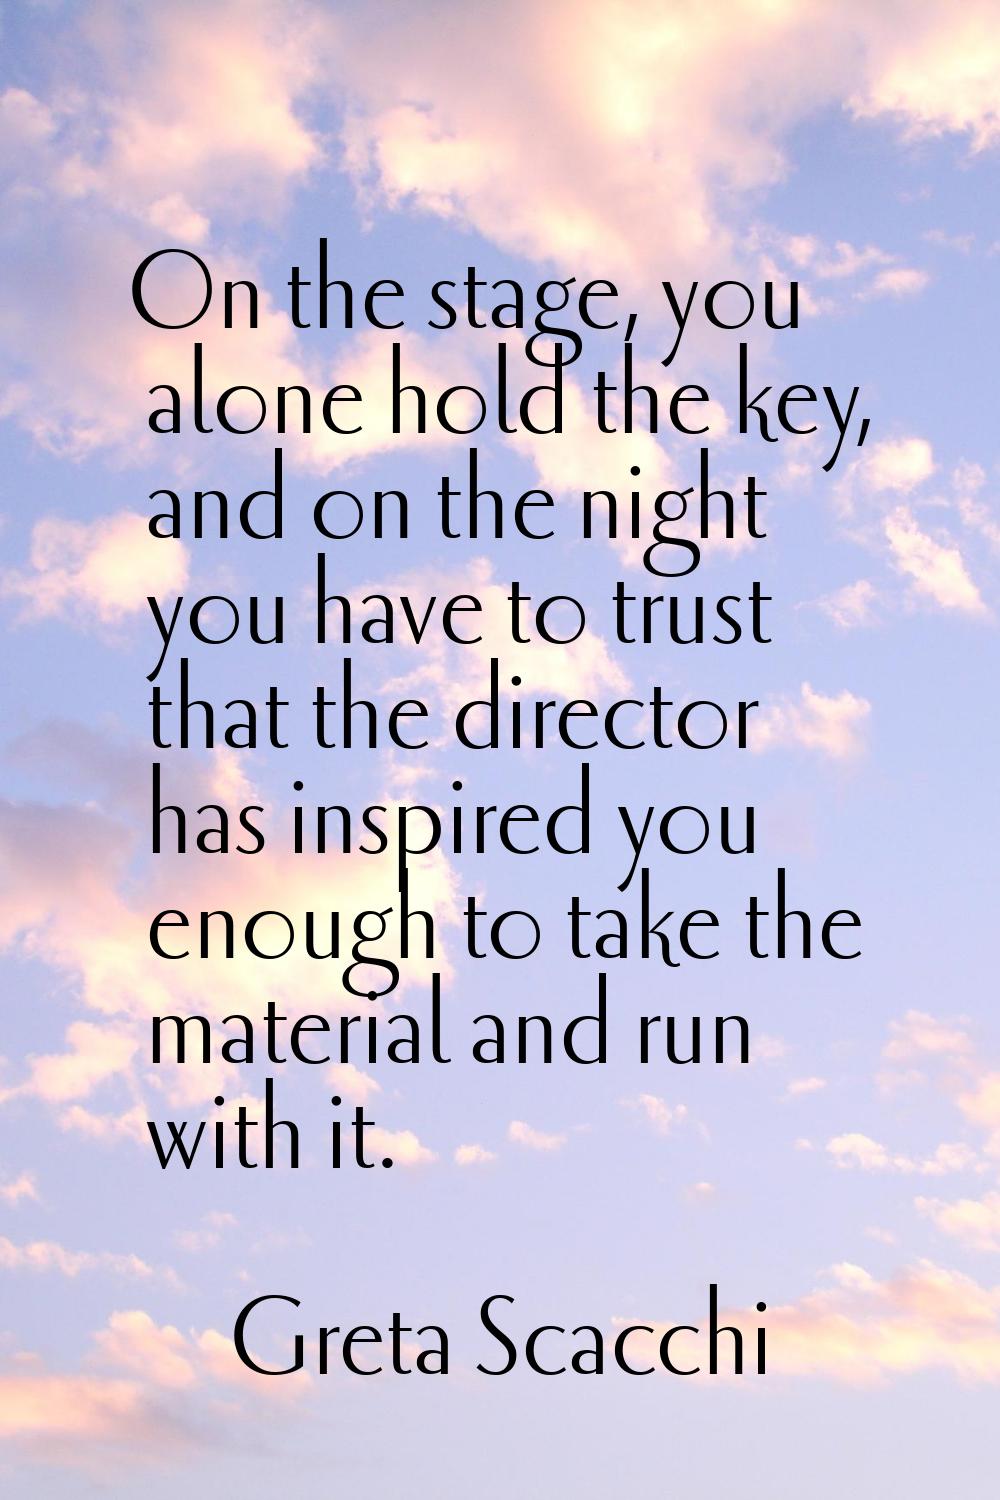 On the stage, you alone hold the key, and on the night you have to trust that the director has insp